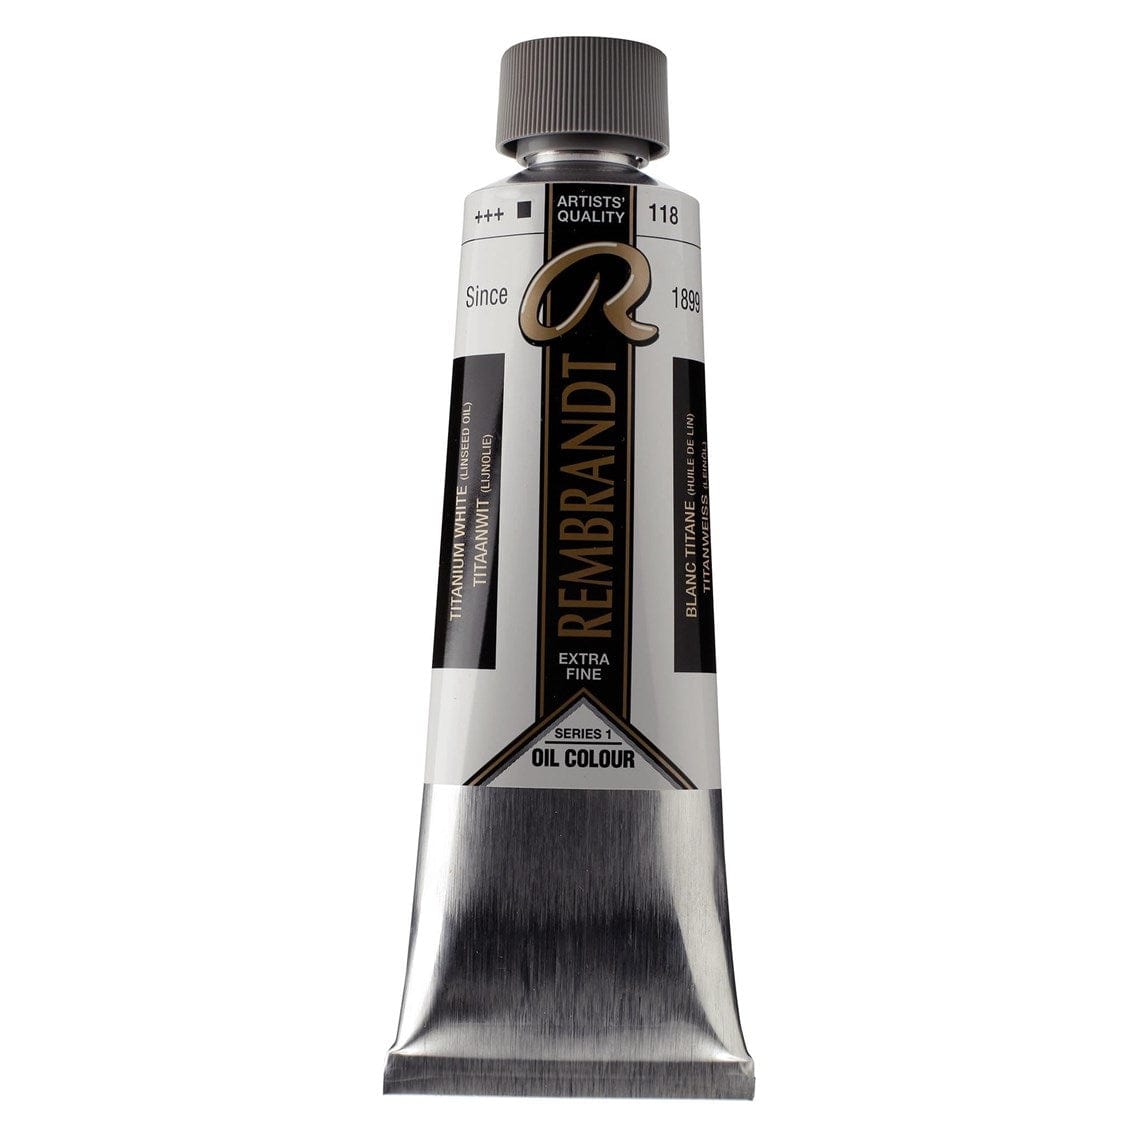 Rembrandt Oliemaling 150ml Titanium White (Linseed oil)